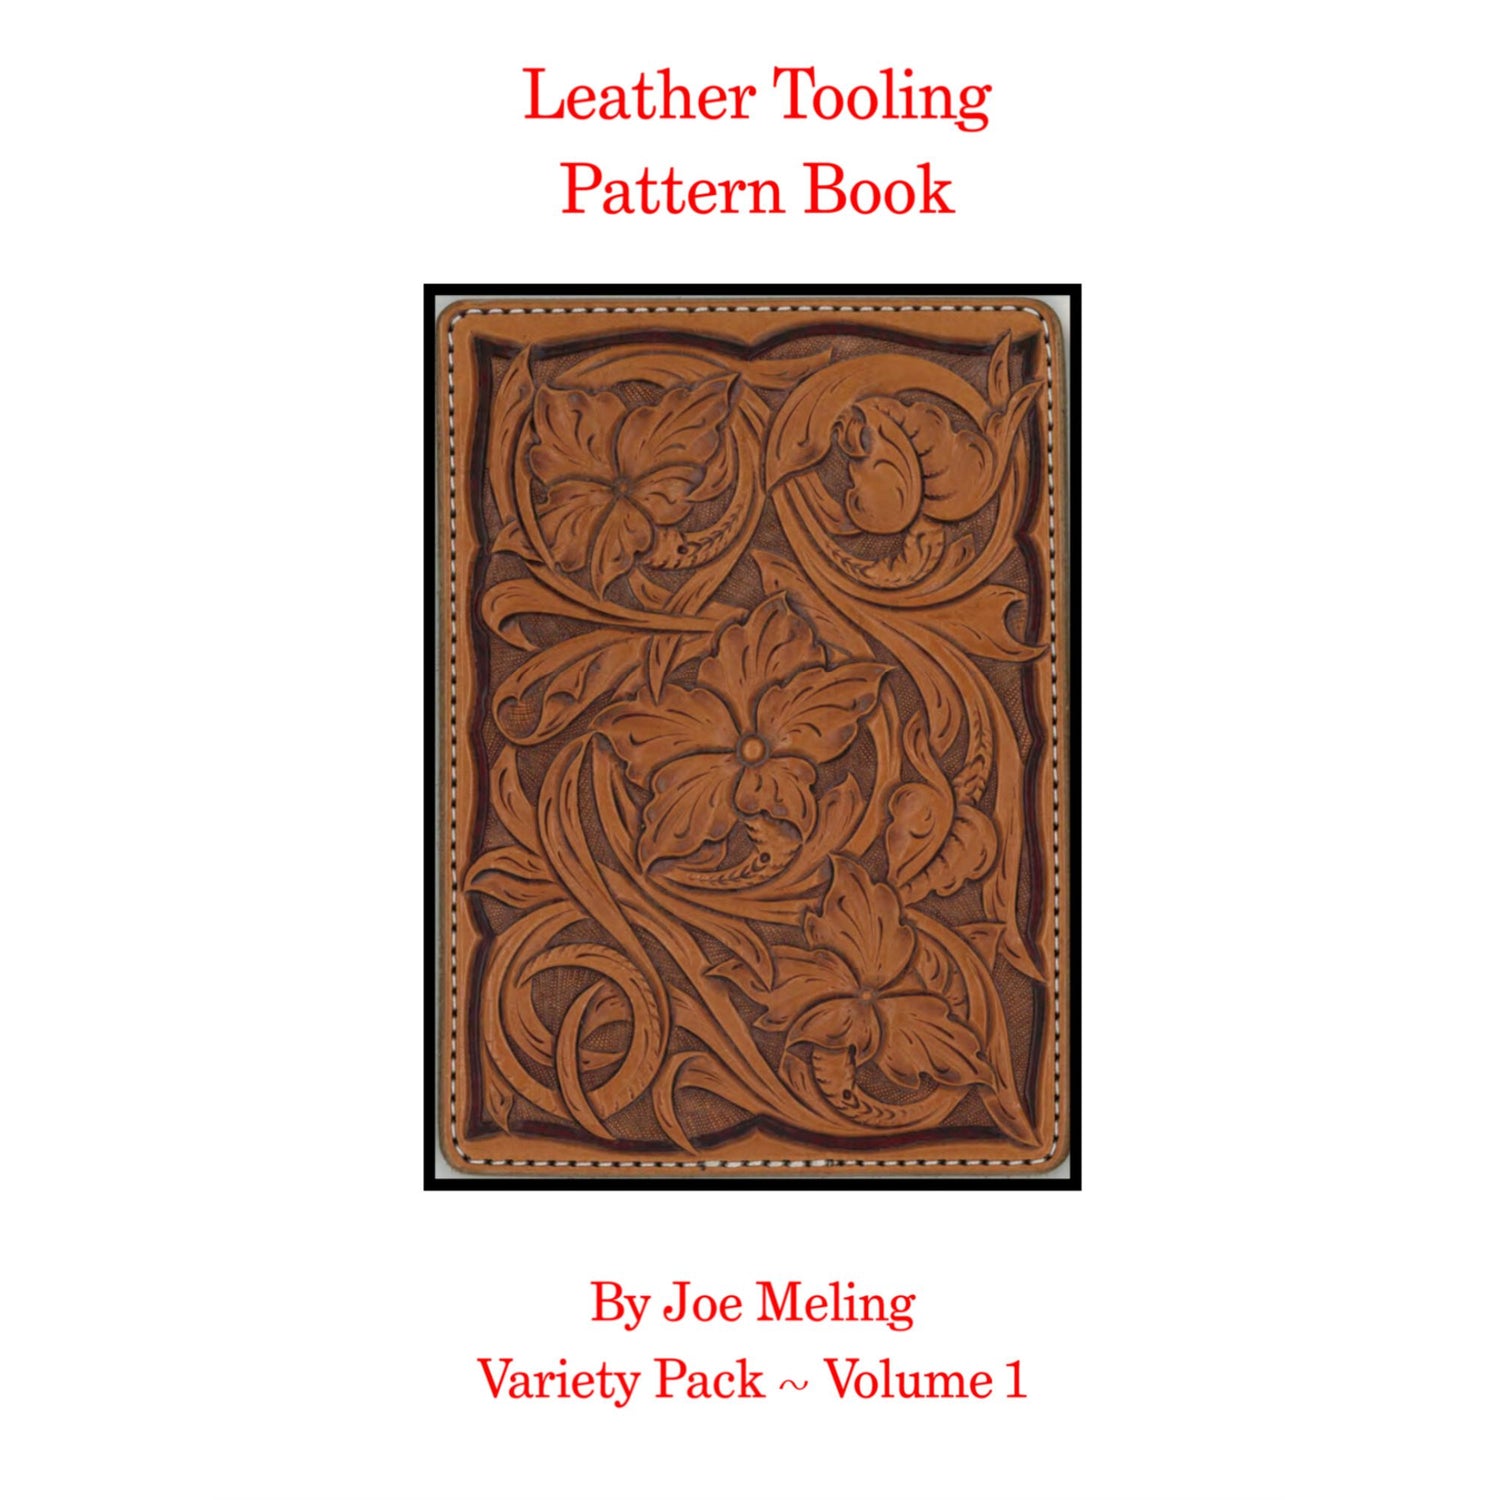 Leather Tooling Pattern Book by Joe Meling - Vol 1